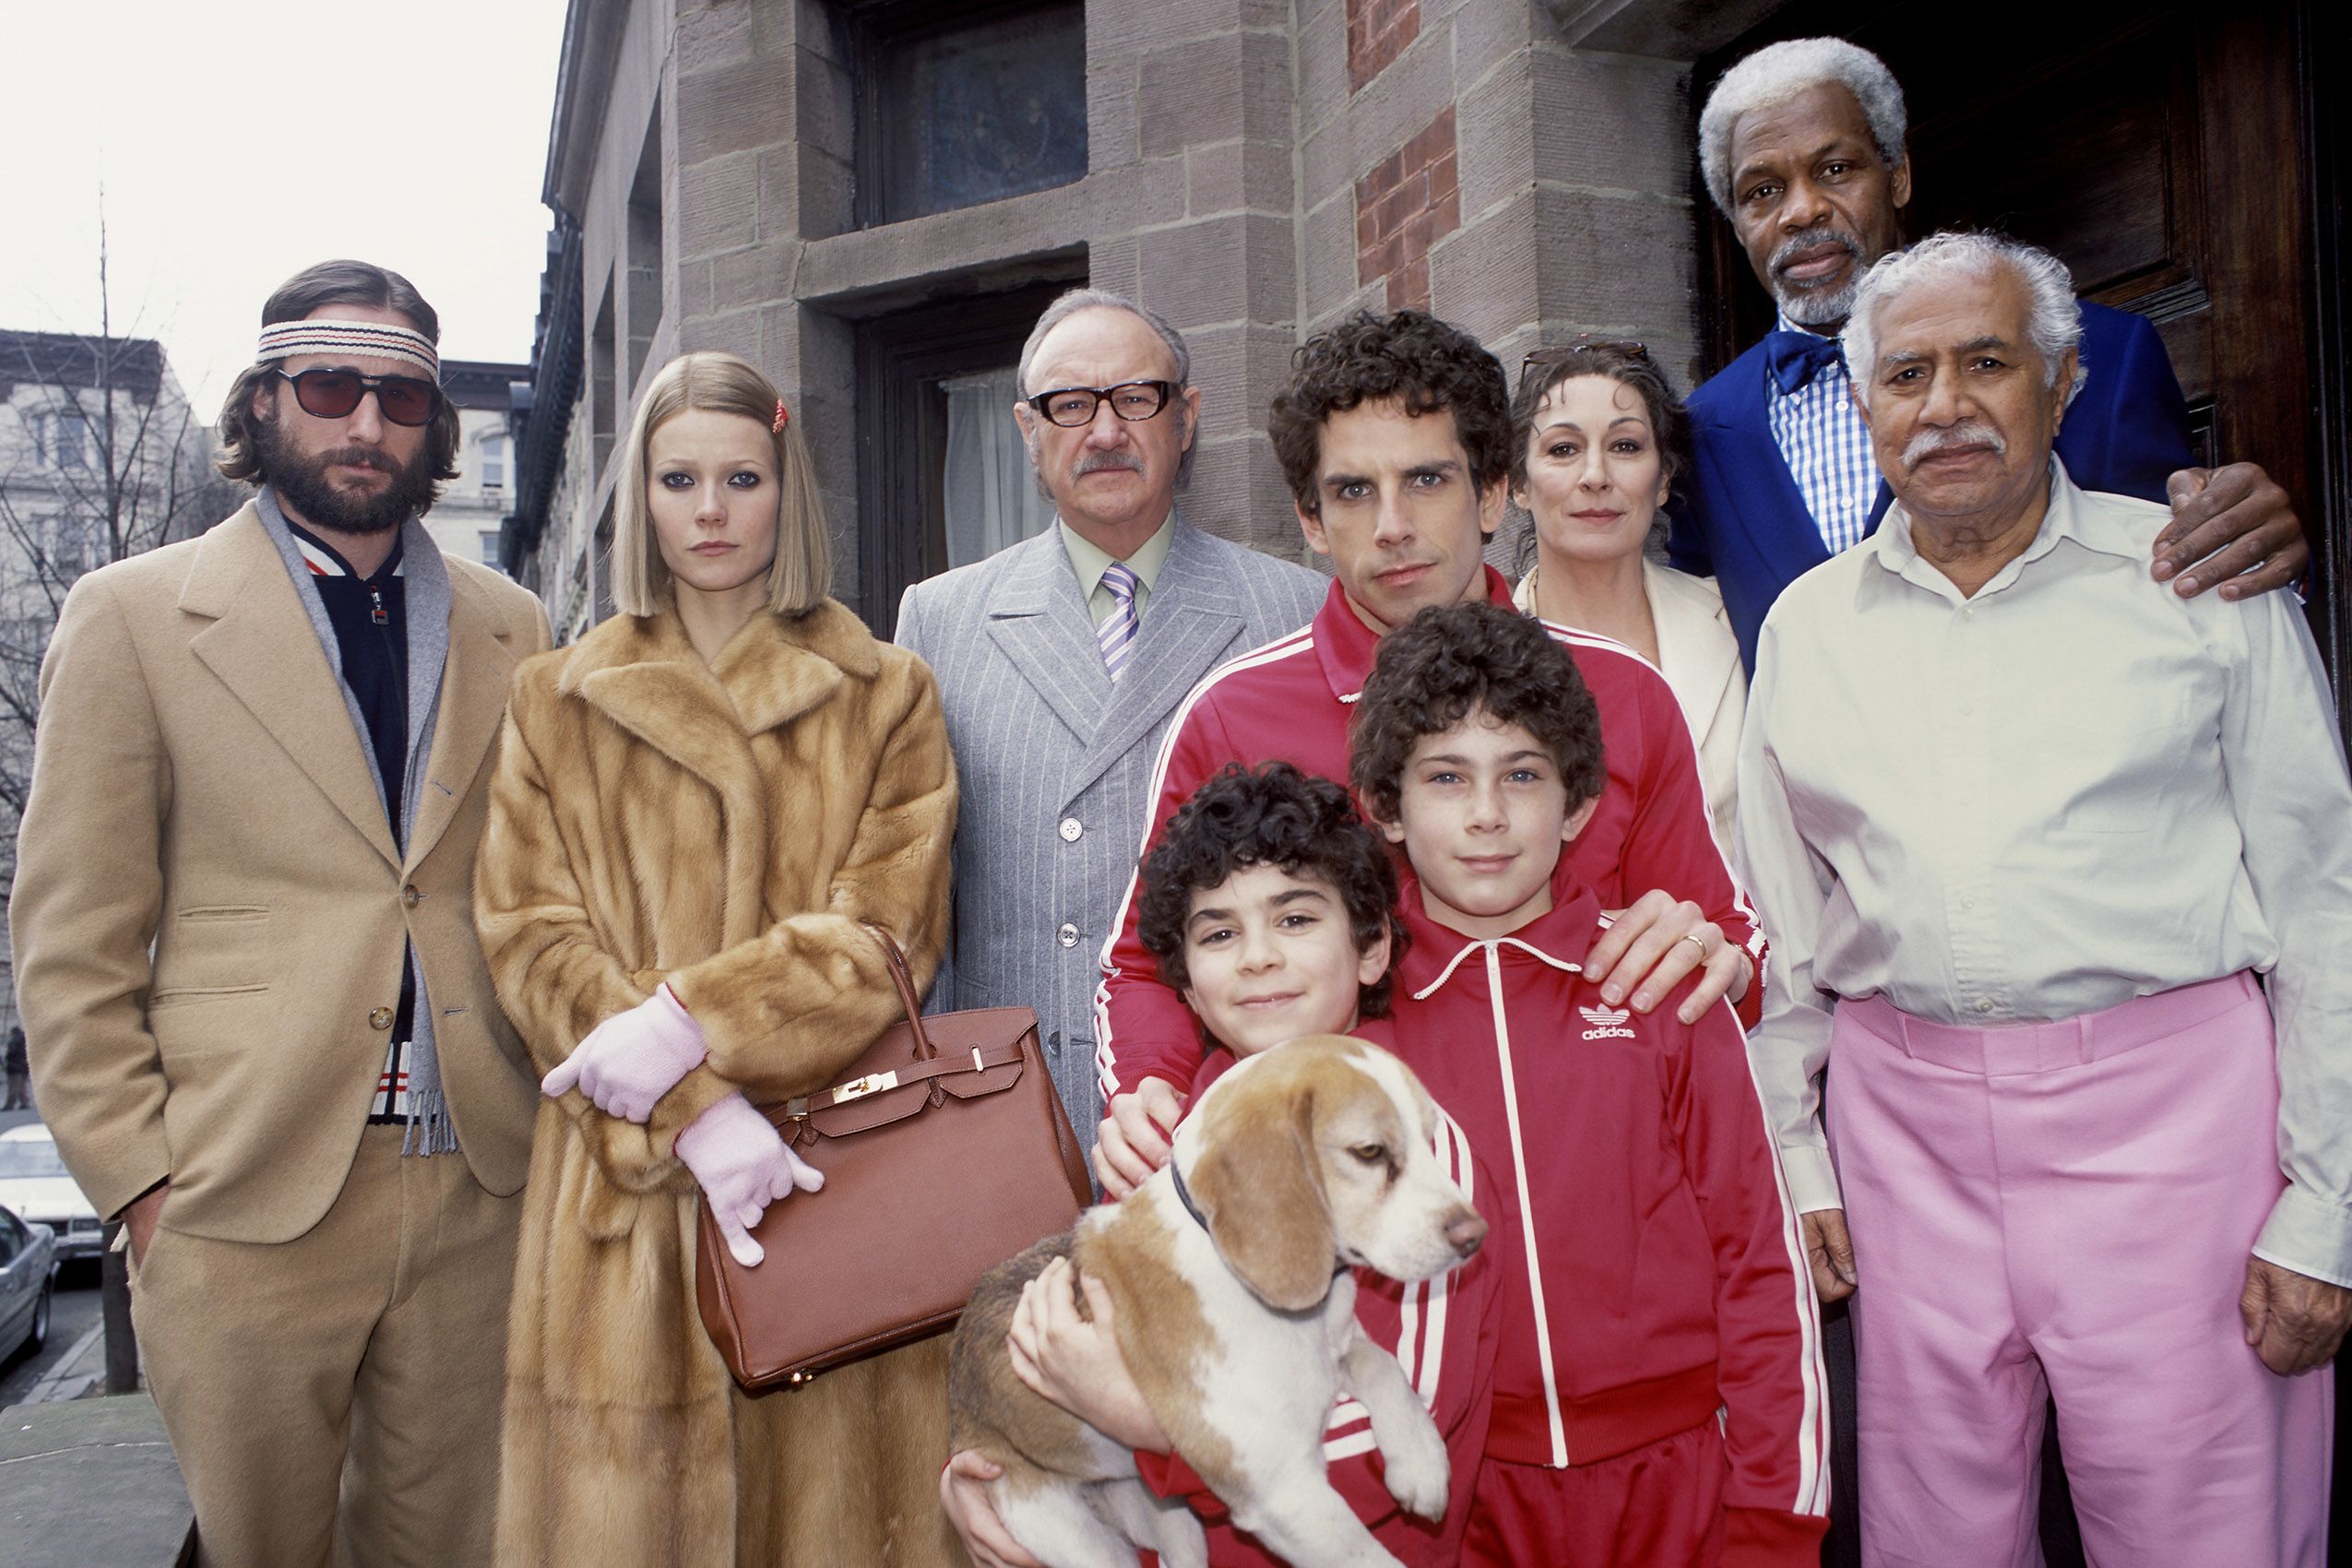 Royal Tenenbaums' at 20: How the film that established the 'Wes